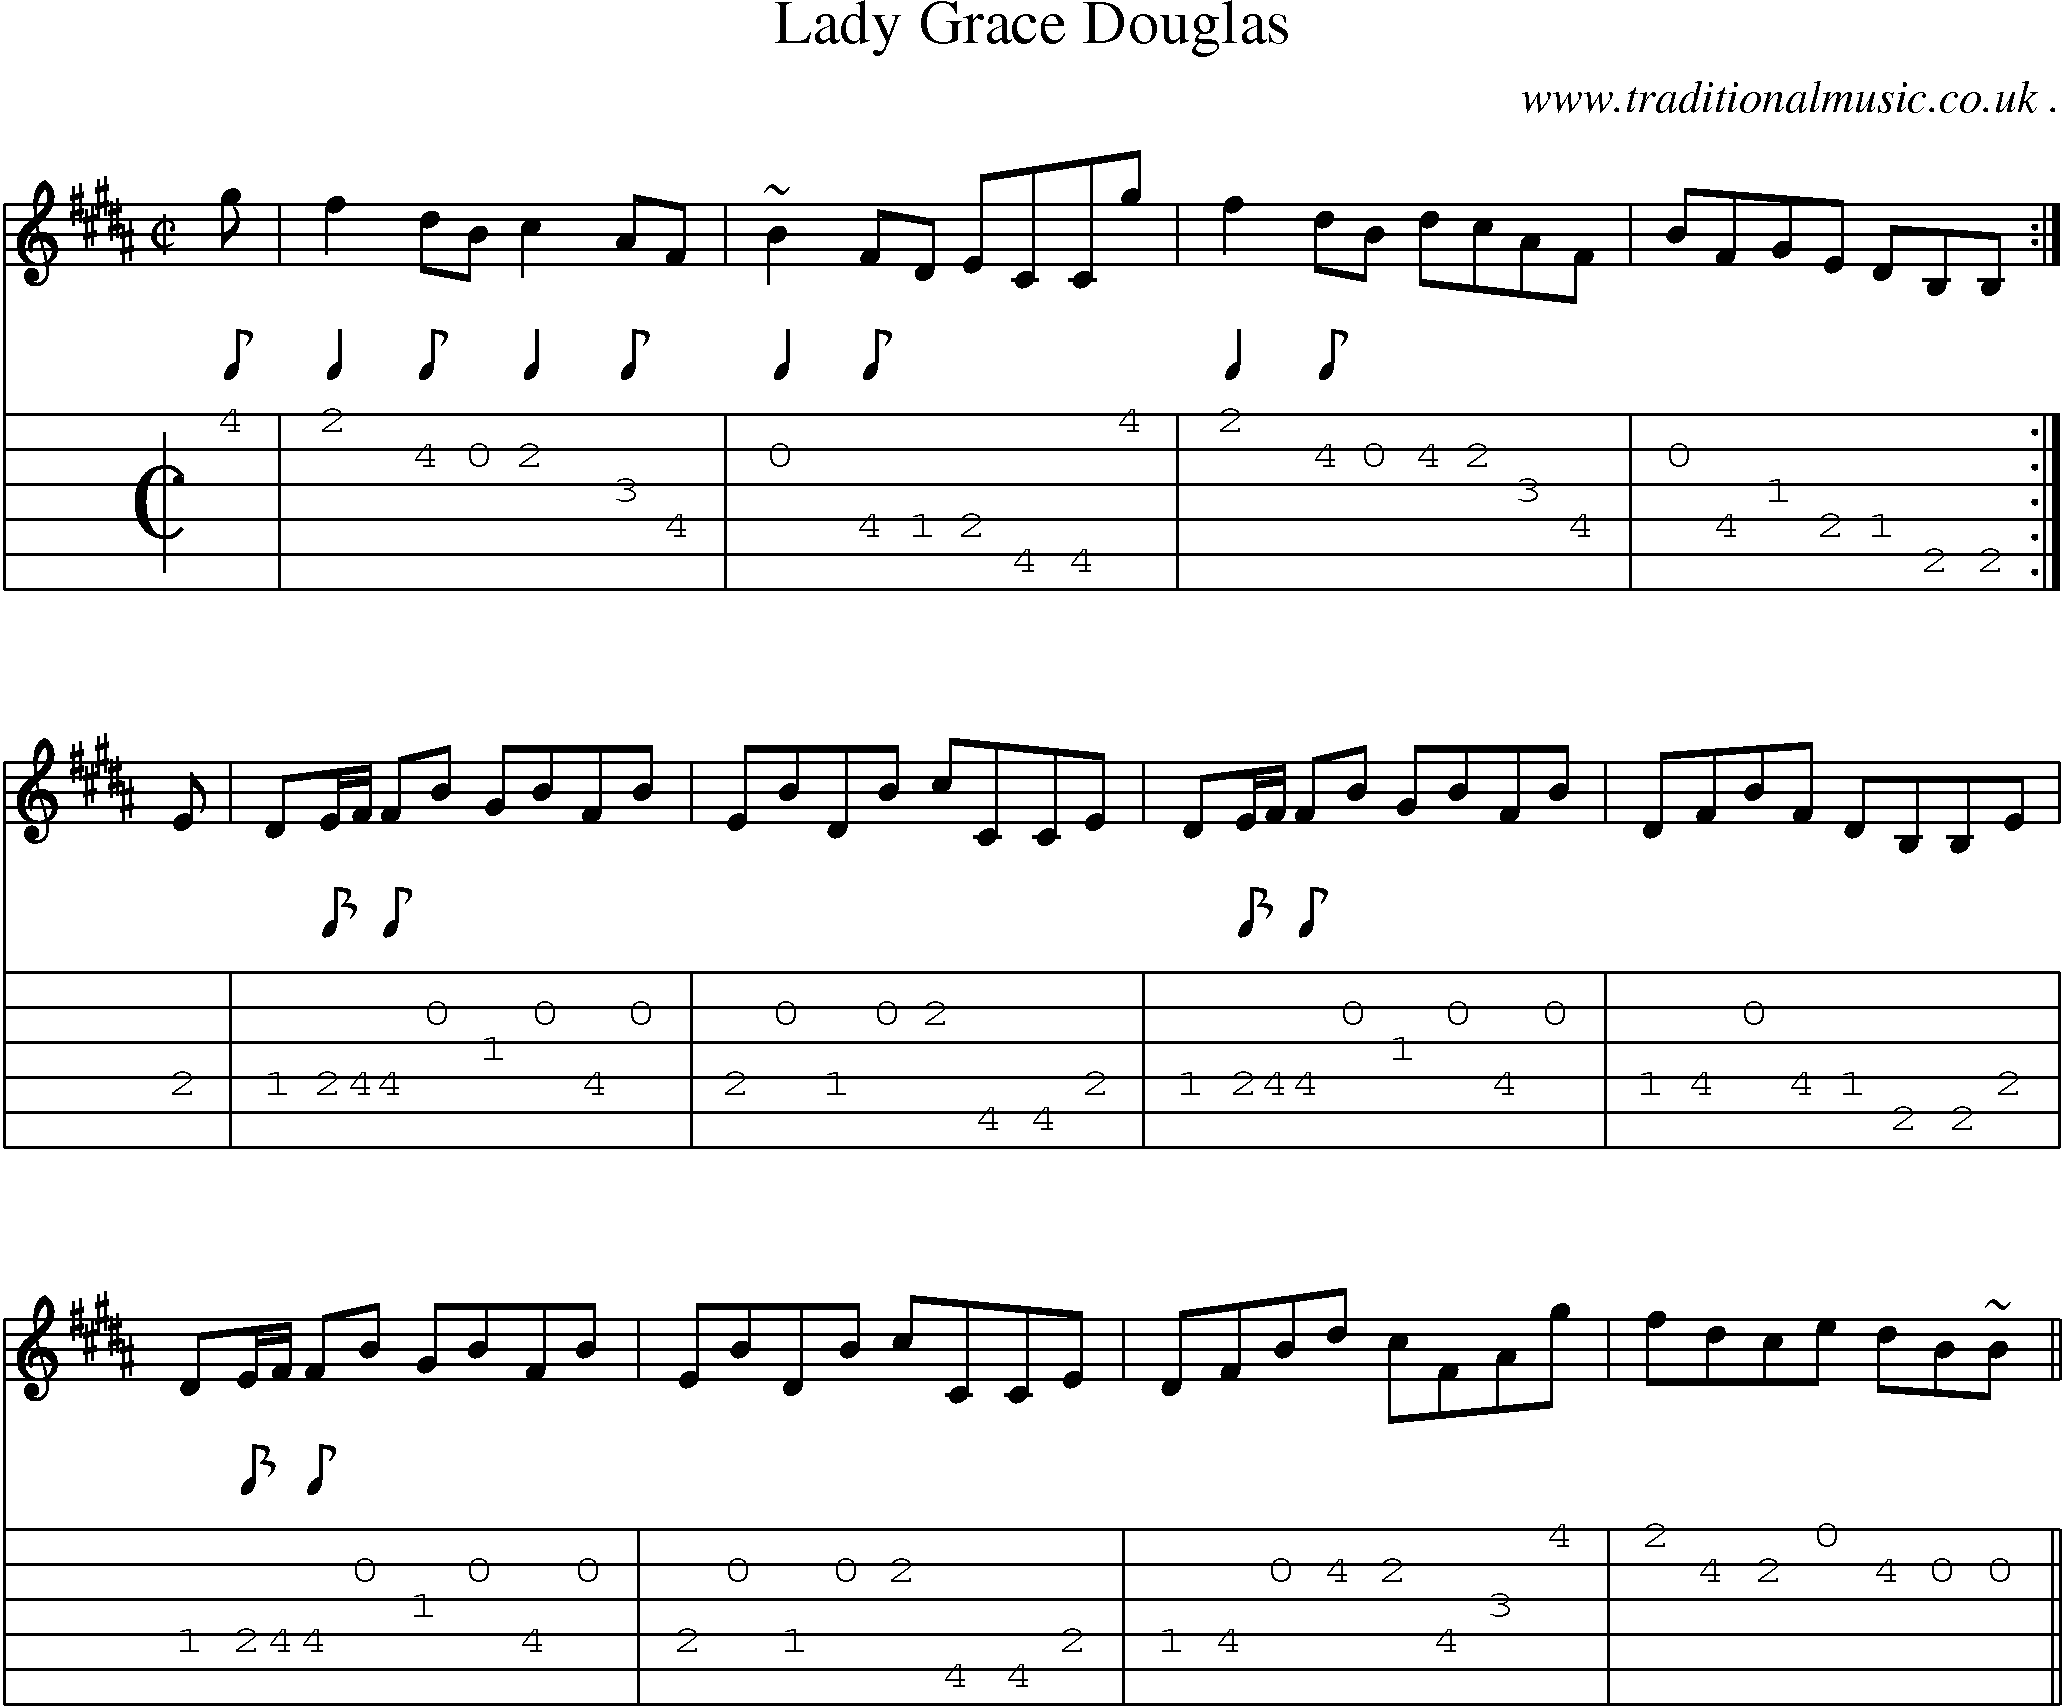 Sheet-music  score, Chords and Guitar Tabs for Lady Grace Douglas